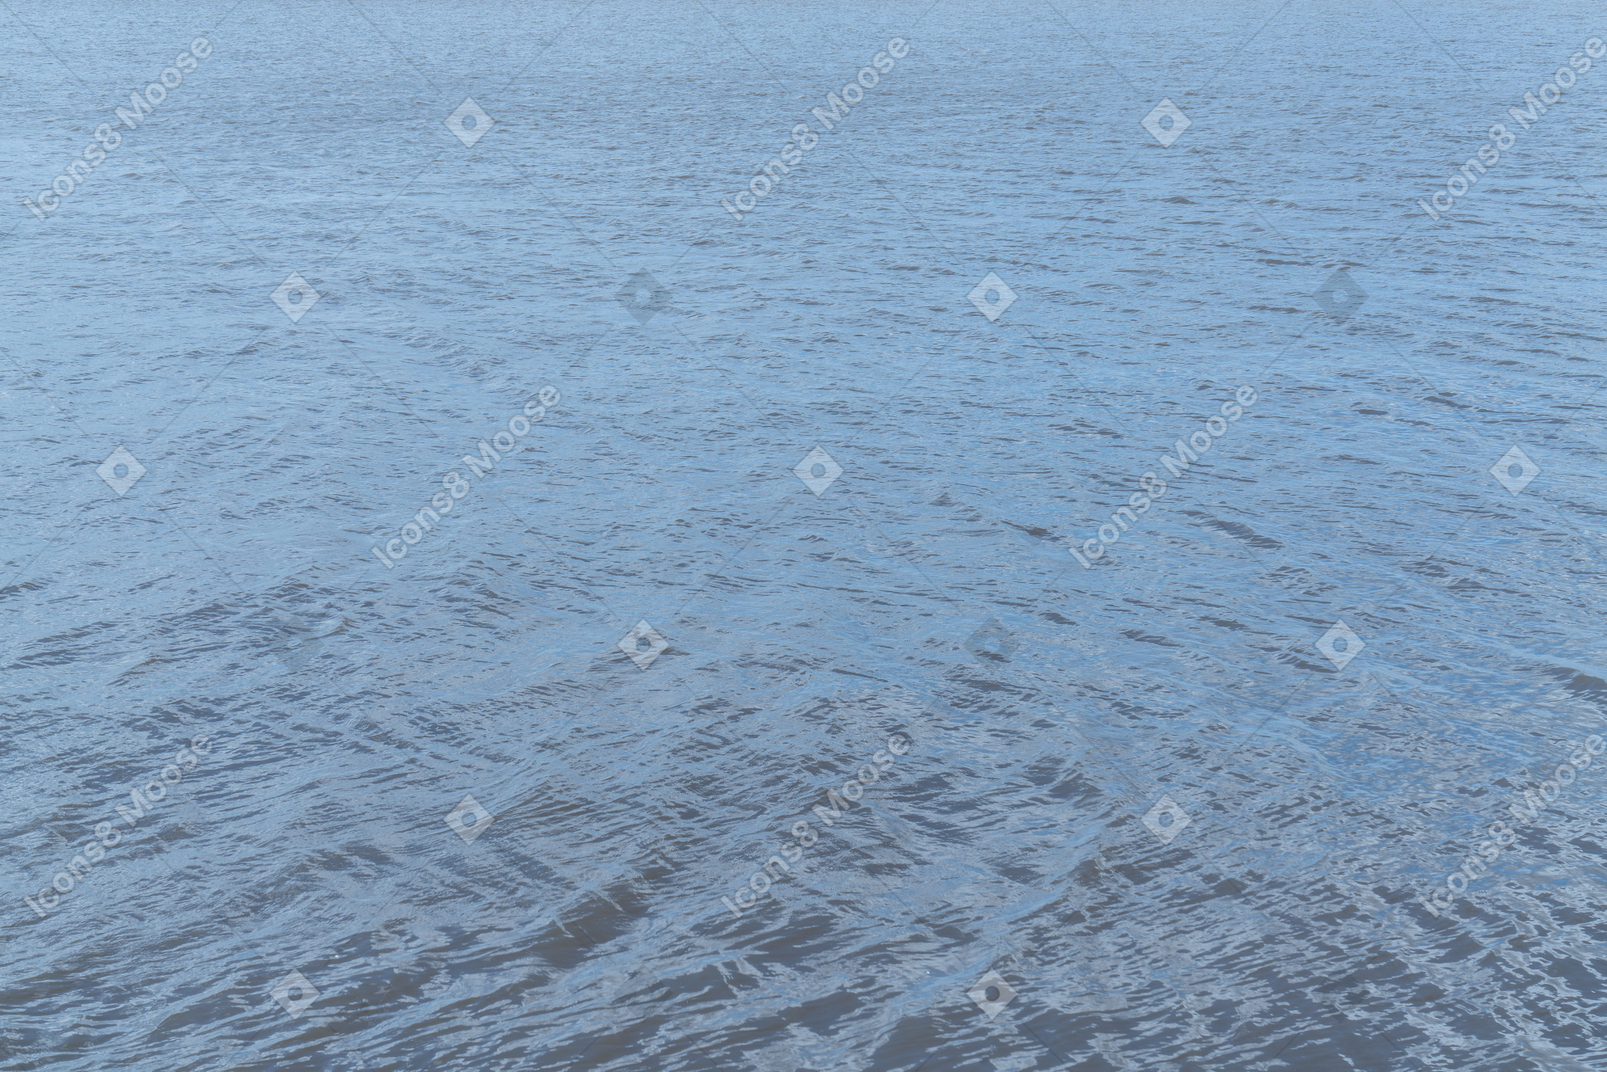 Ripples on the surface of water